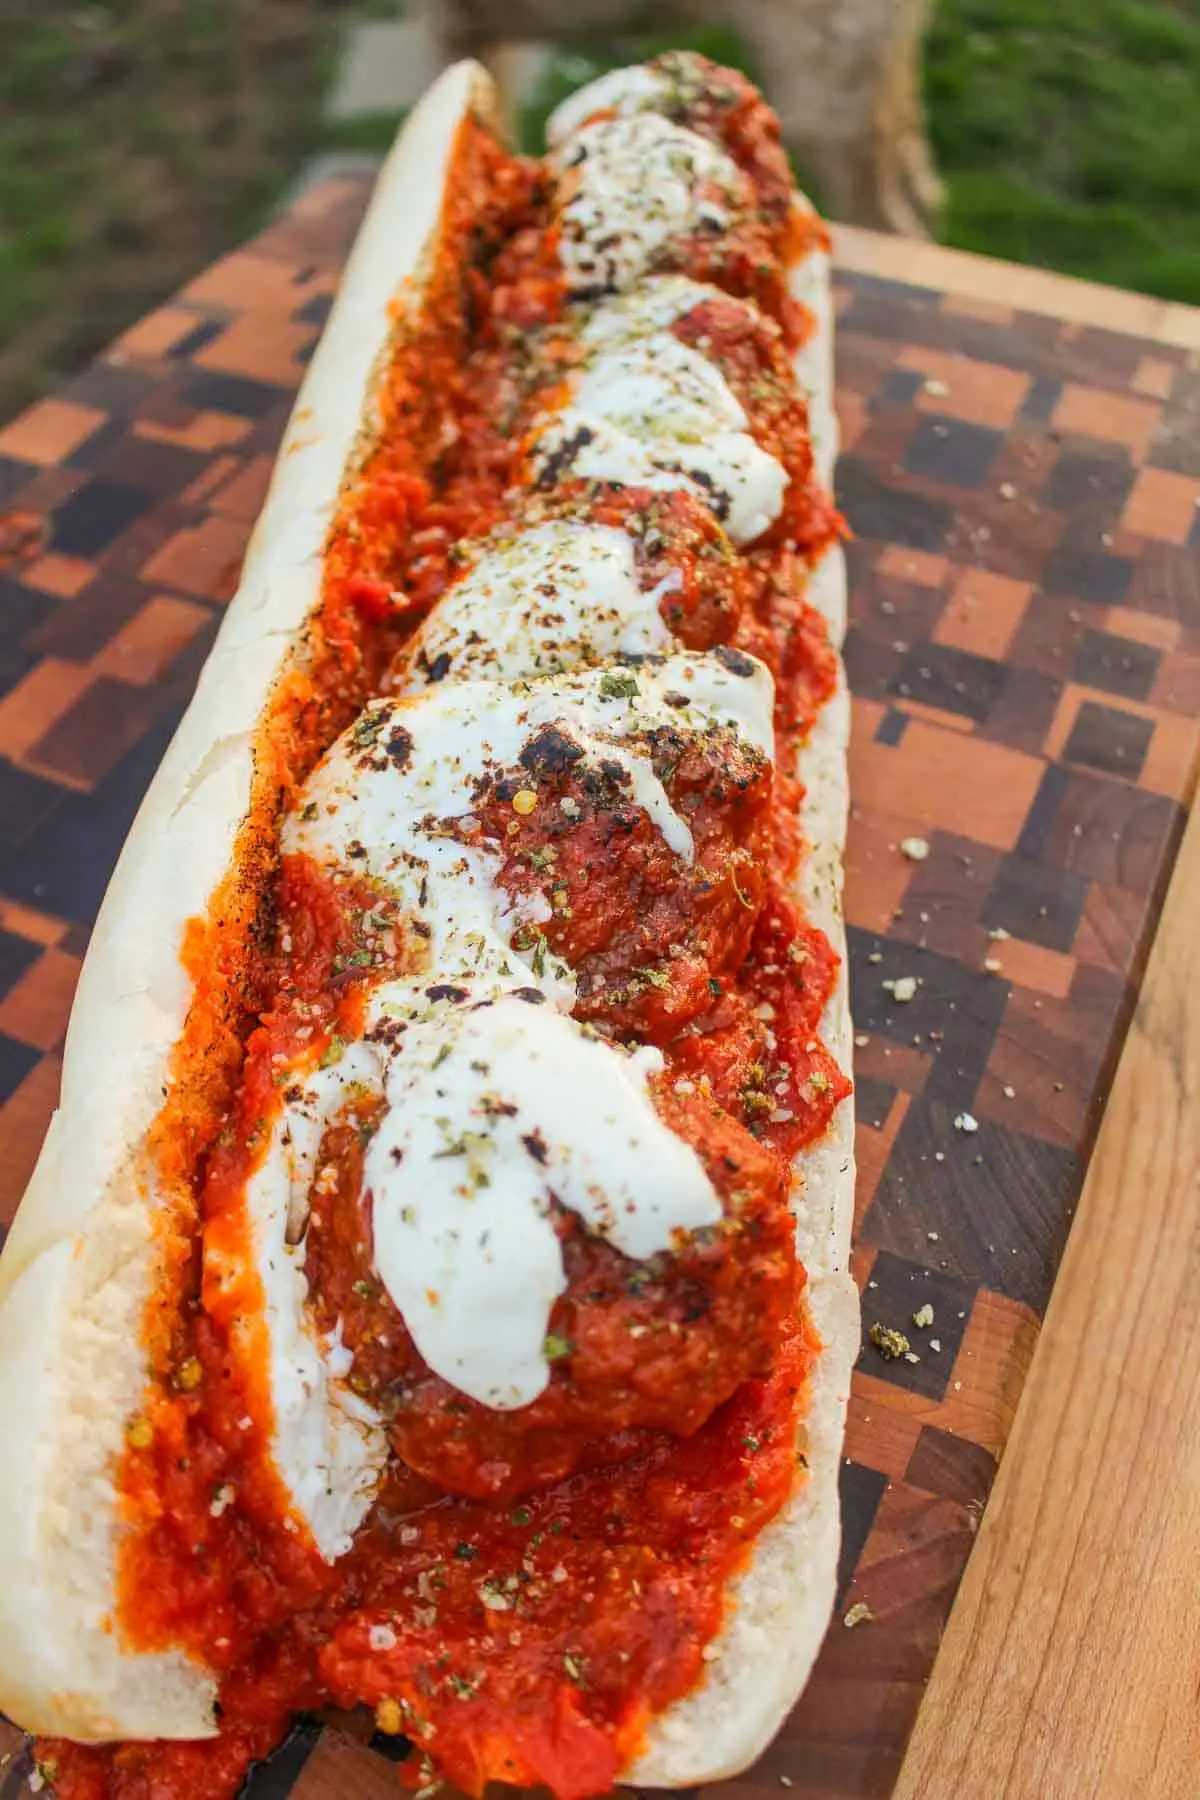 smoked meatball subs - What goes good on a meatball sub